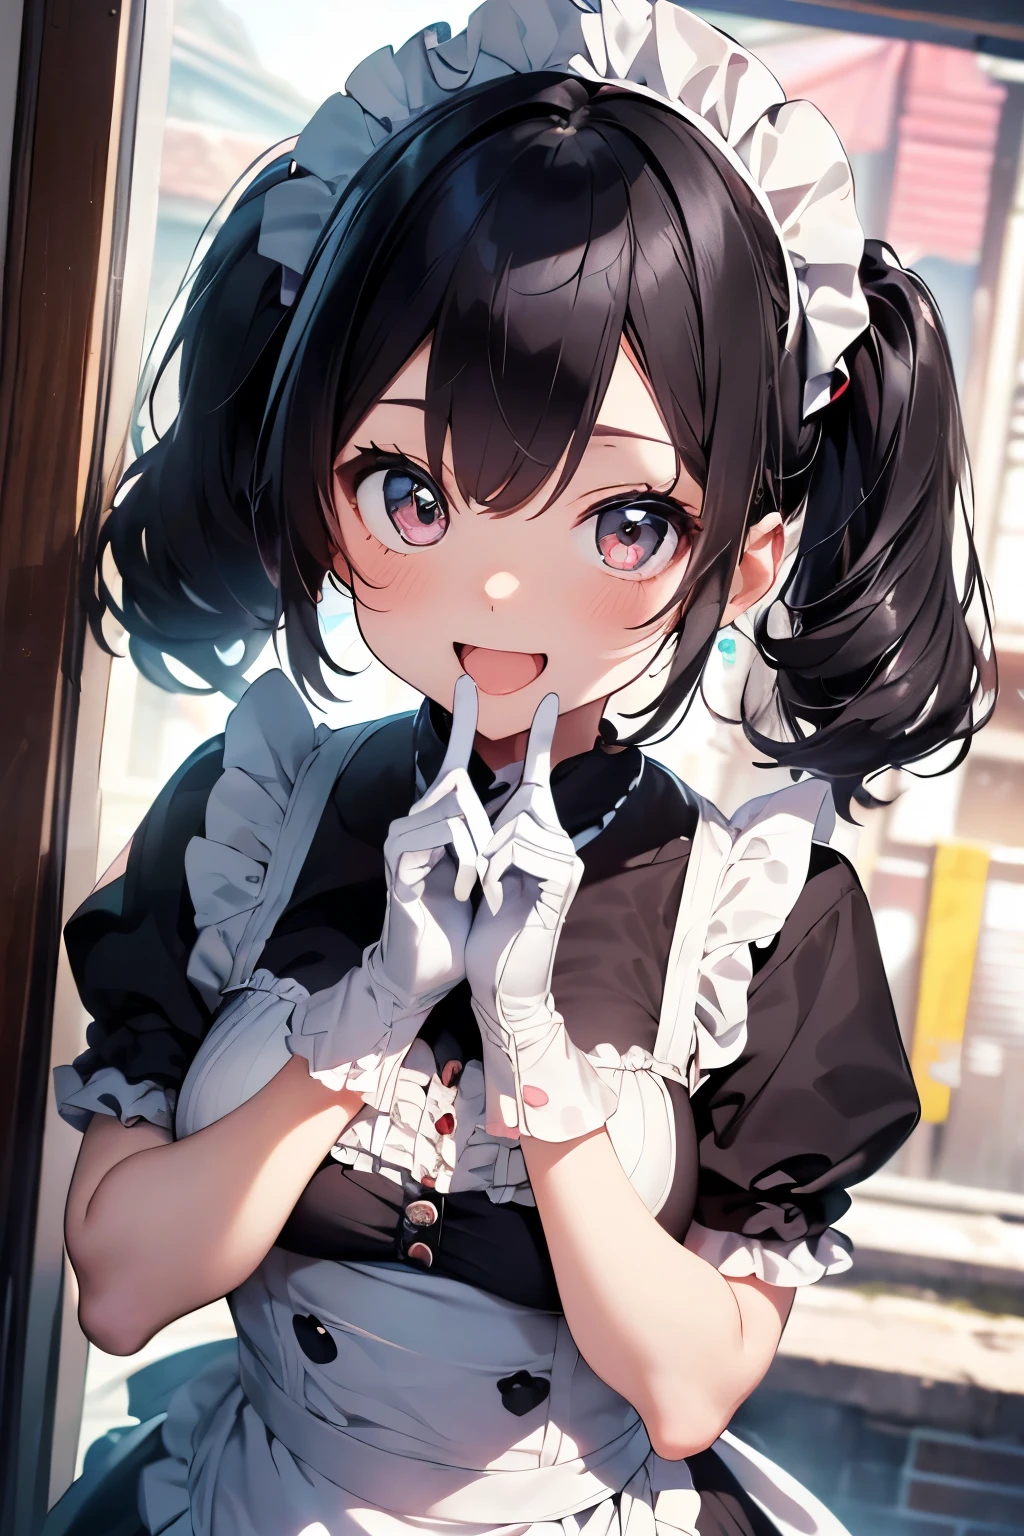 chibi character,maid motif,(brush),((cute,kawaii,wonderland)),((pastel color)),((Cute assortment)),(A big smile with an open mouth),((hand heart:1.1)),((Showa era maid outfit with lots of frills:1.3)),Shiny hair,(Natural Color),((Headdress:1.2)),(Retro、modern:1.25),(Black hair twin tails:1.25),(gloves、Gloves).